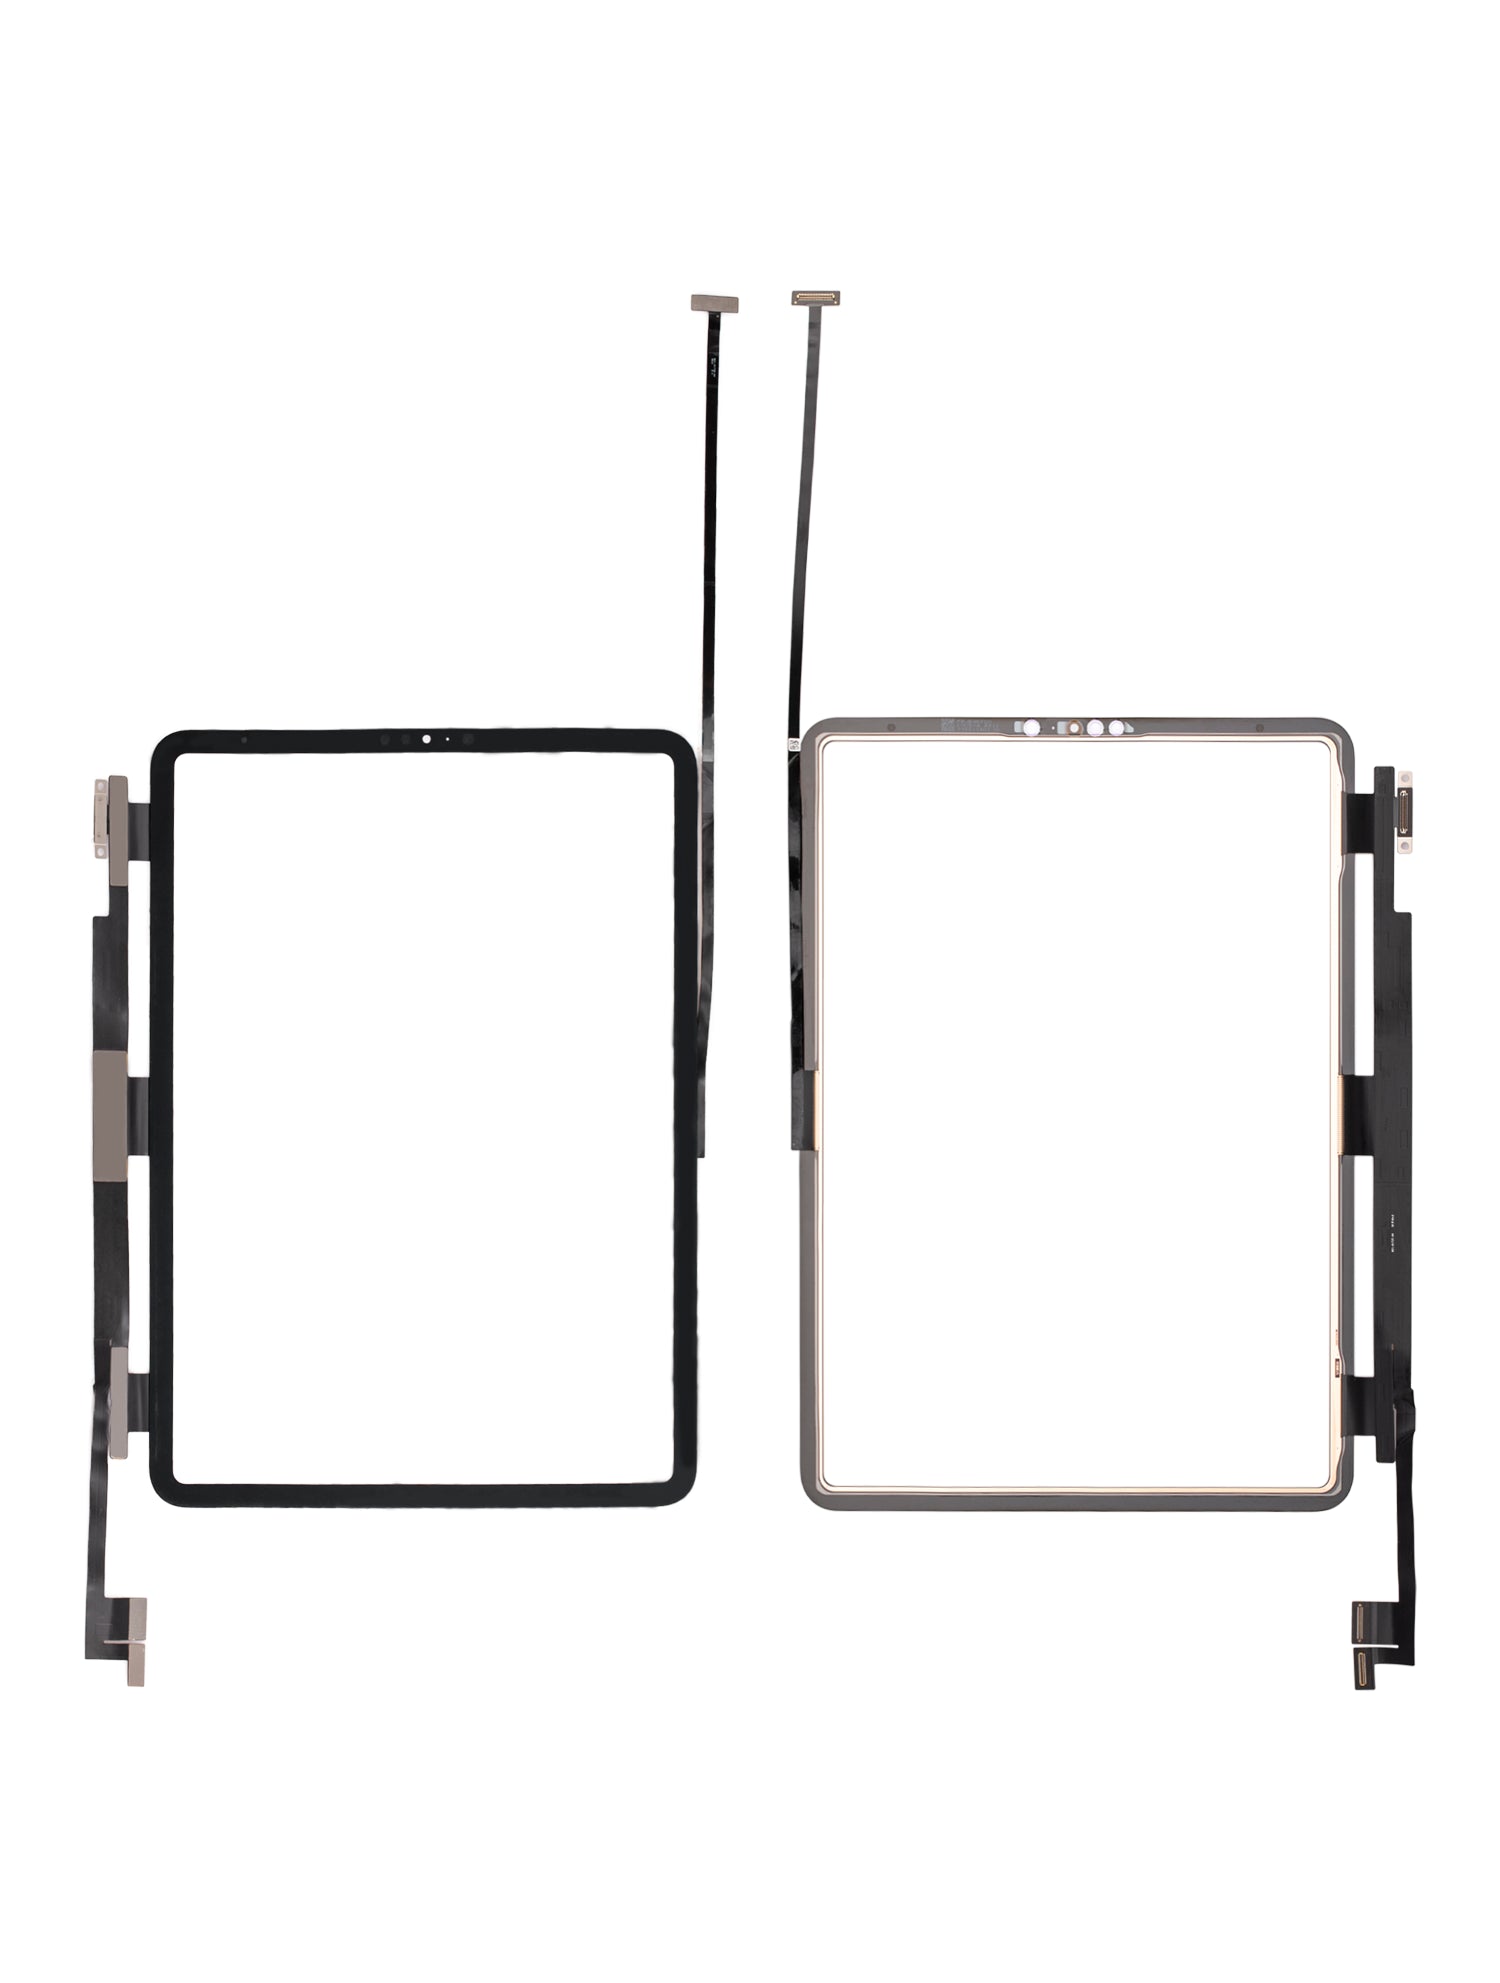 DIGITIZER (GLASS SEPARATION REQUIRED) FOR IPAD PRO 11" (1ST/2ND) GEN